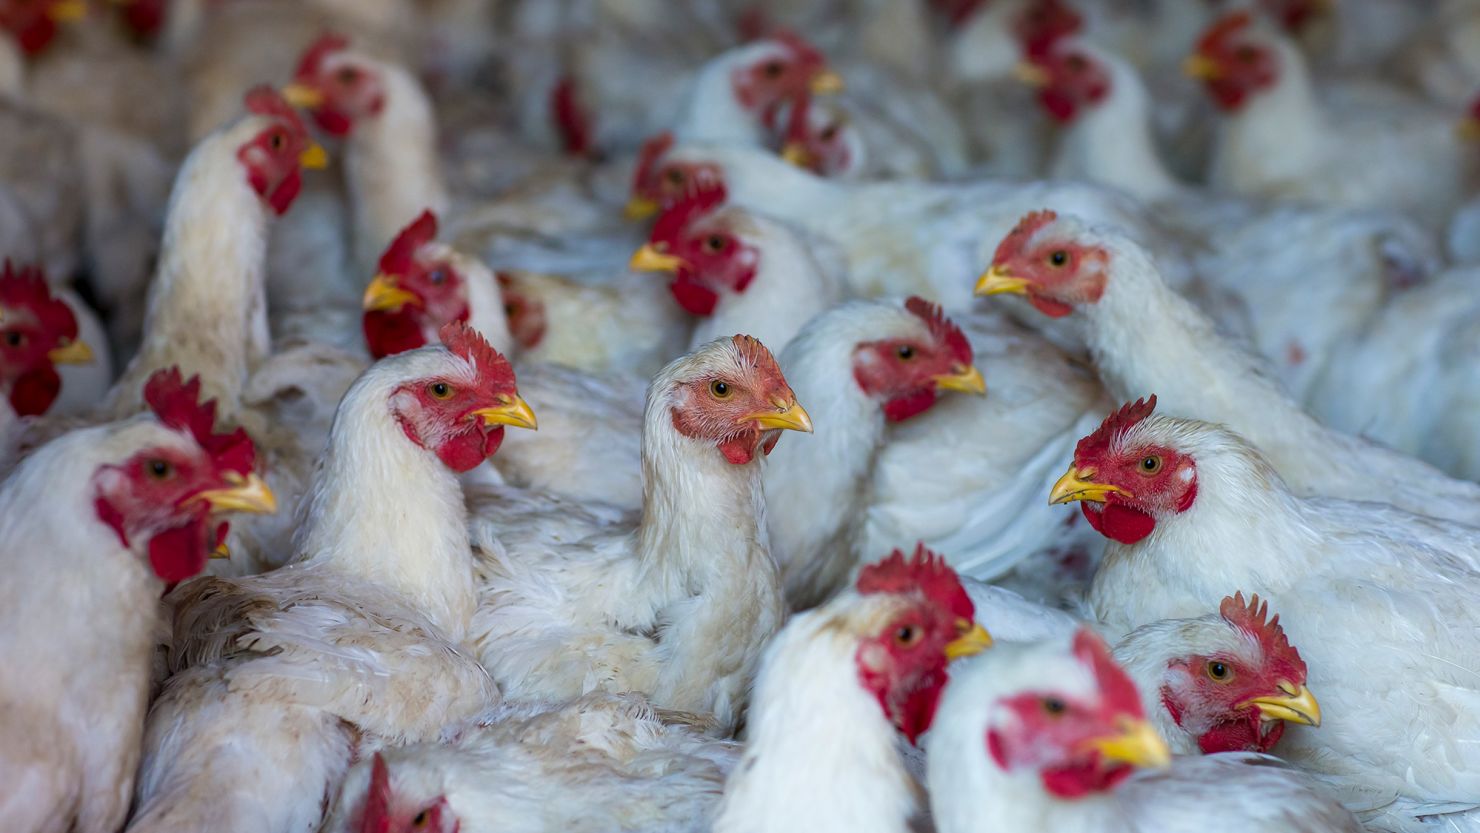 The H5N1 avian flu virus has been causing outbreaks among poultry in the United States, with 48 states affected. The risk to the public remains low, according to the CDC.